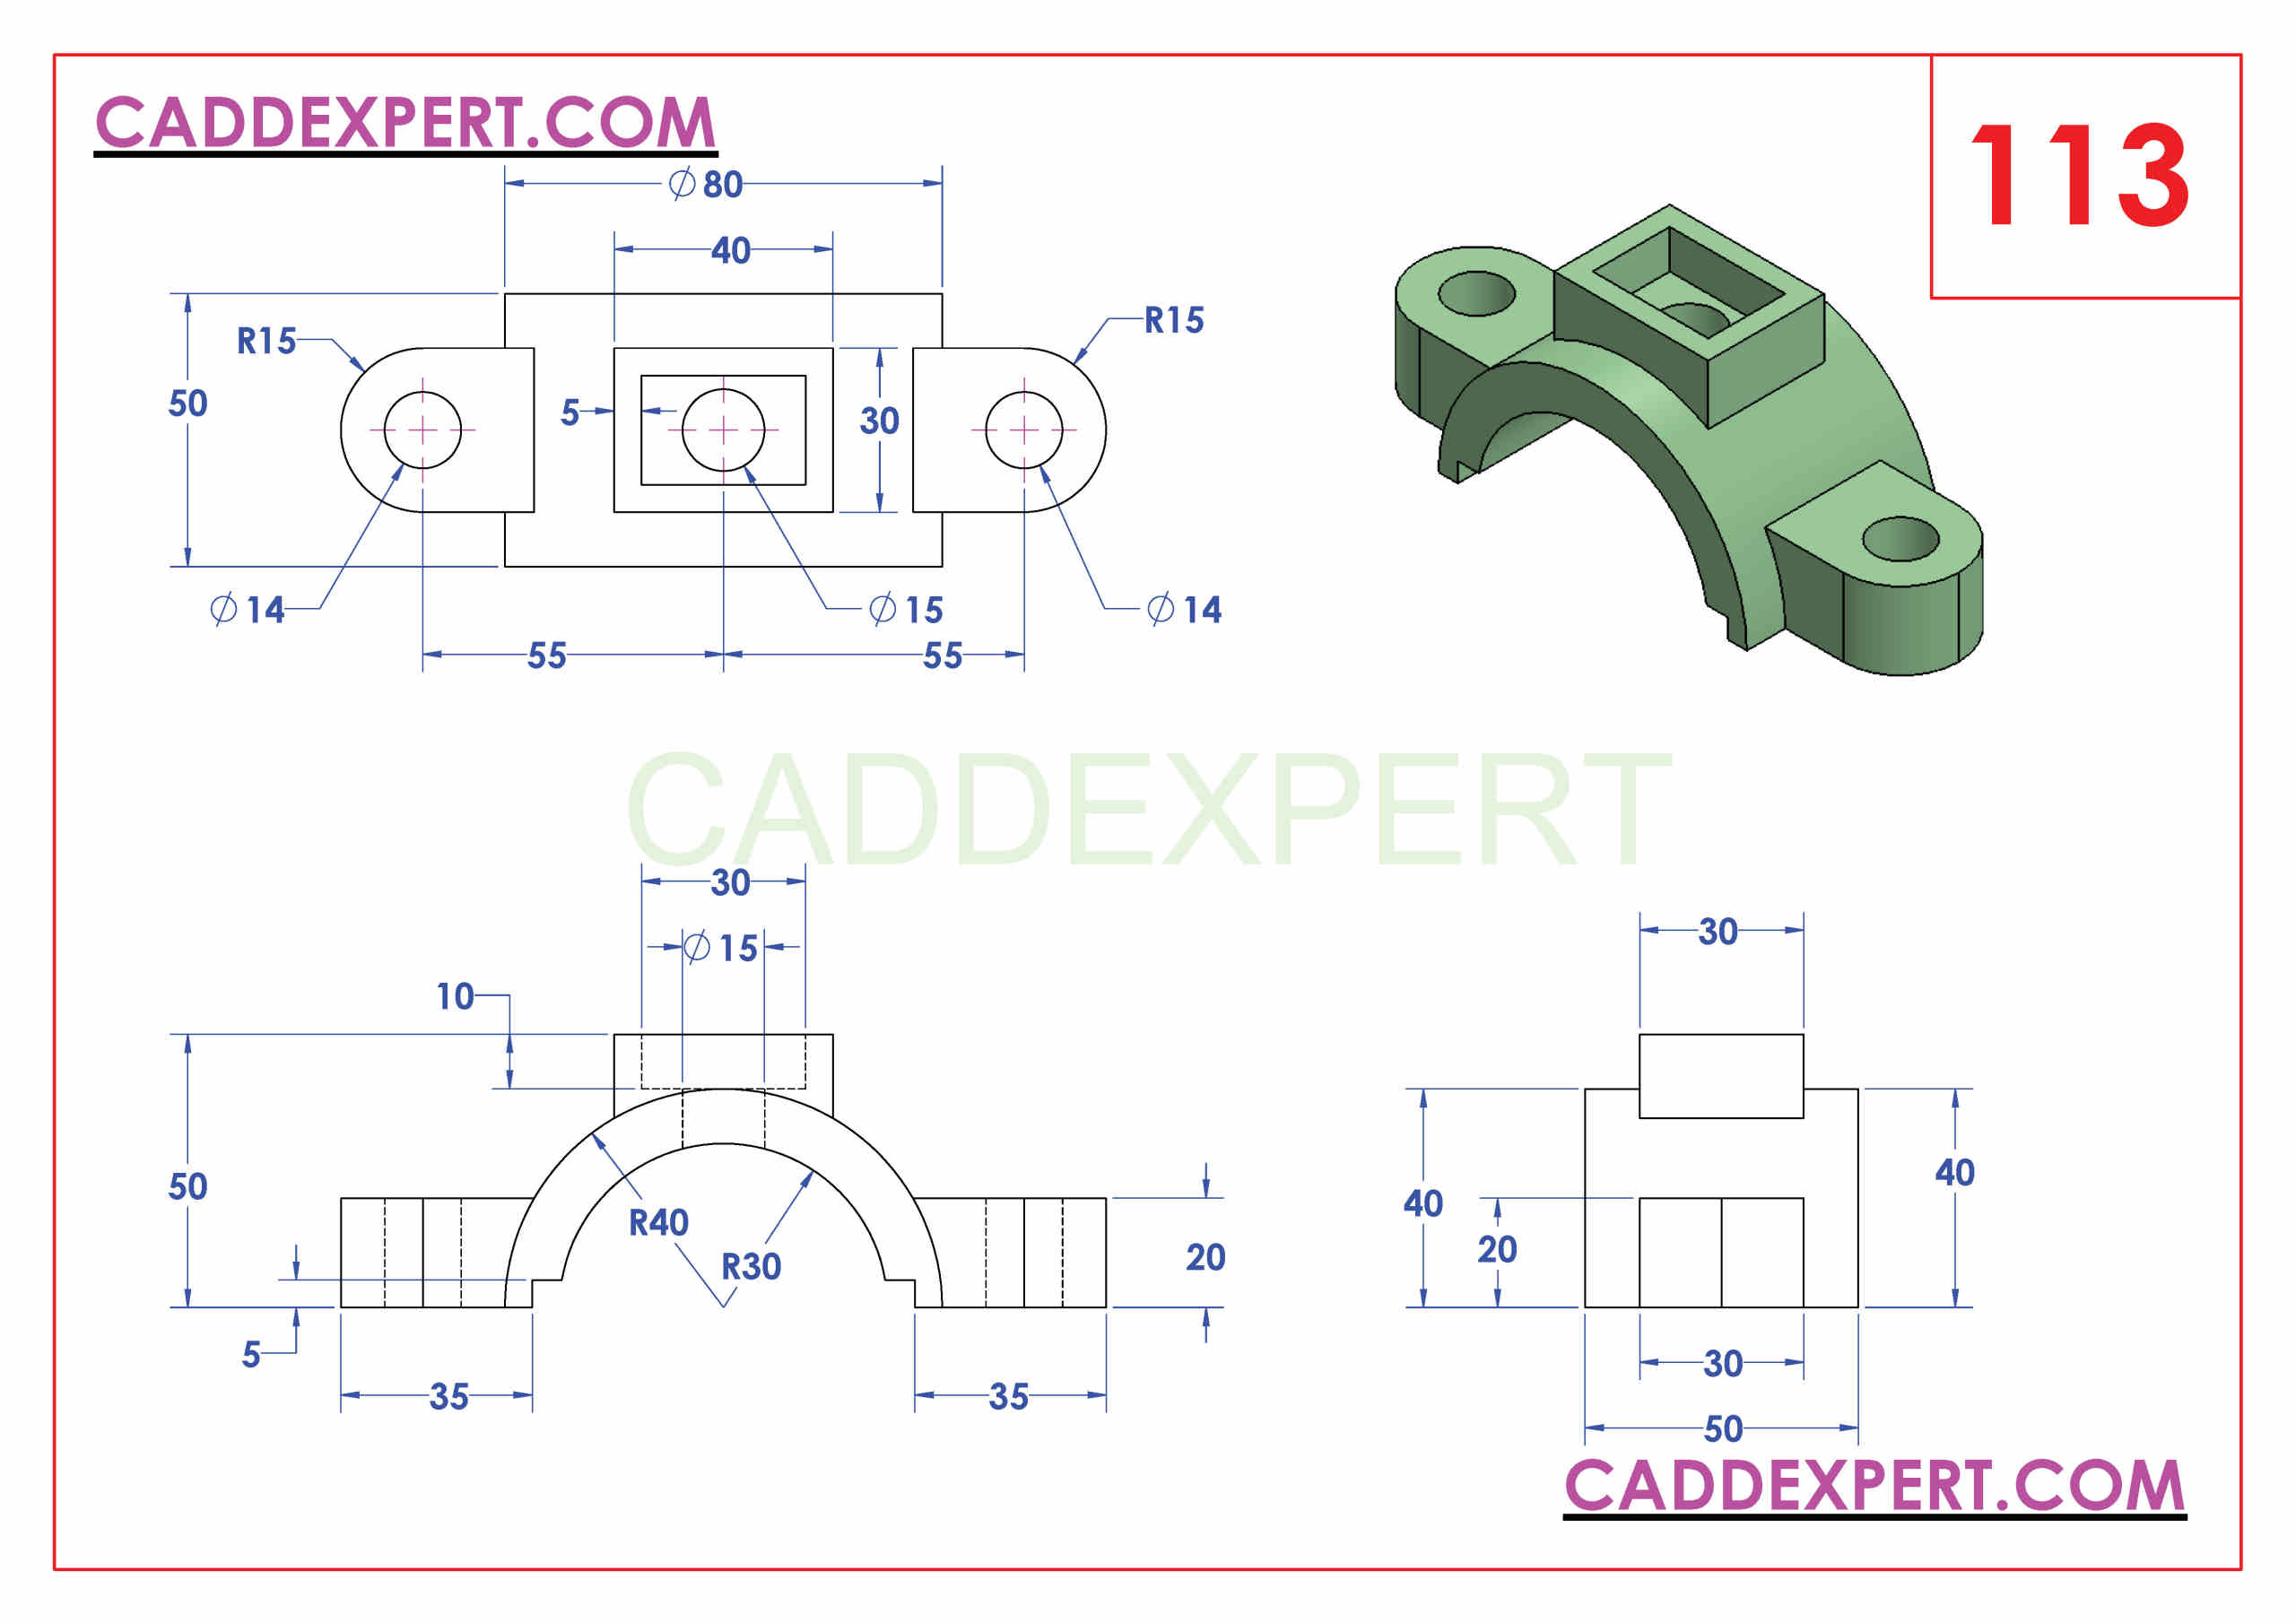 solidworks assembly exercises pdf free download